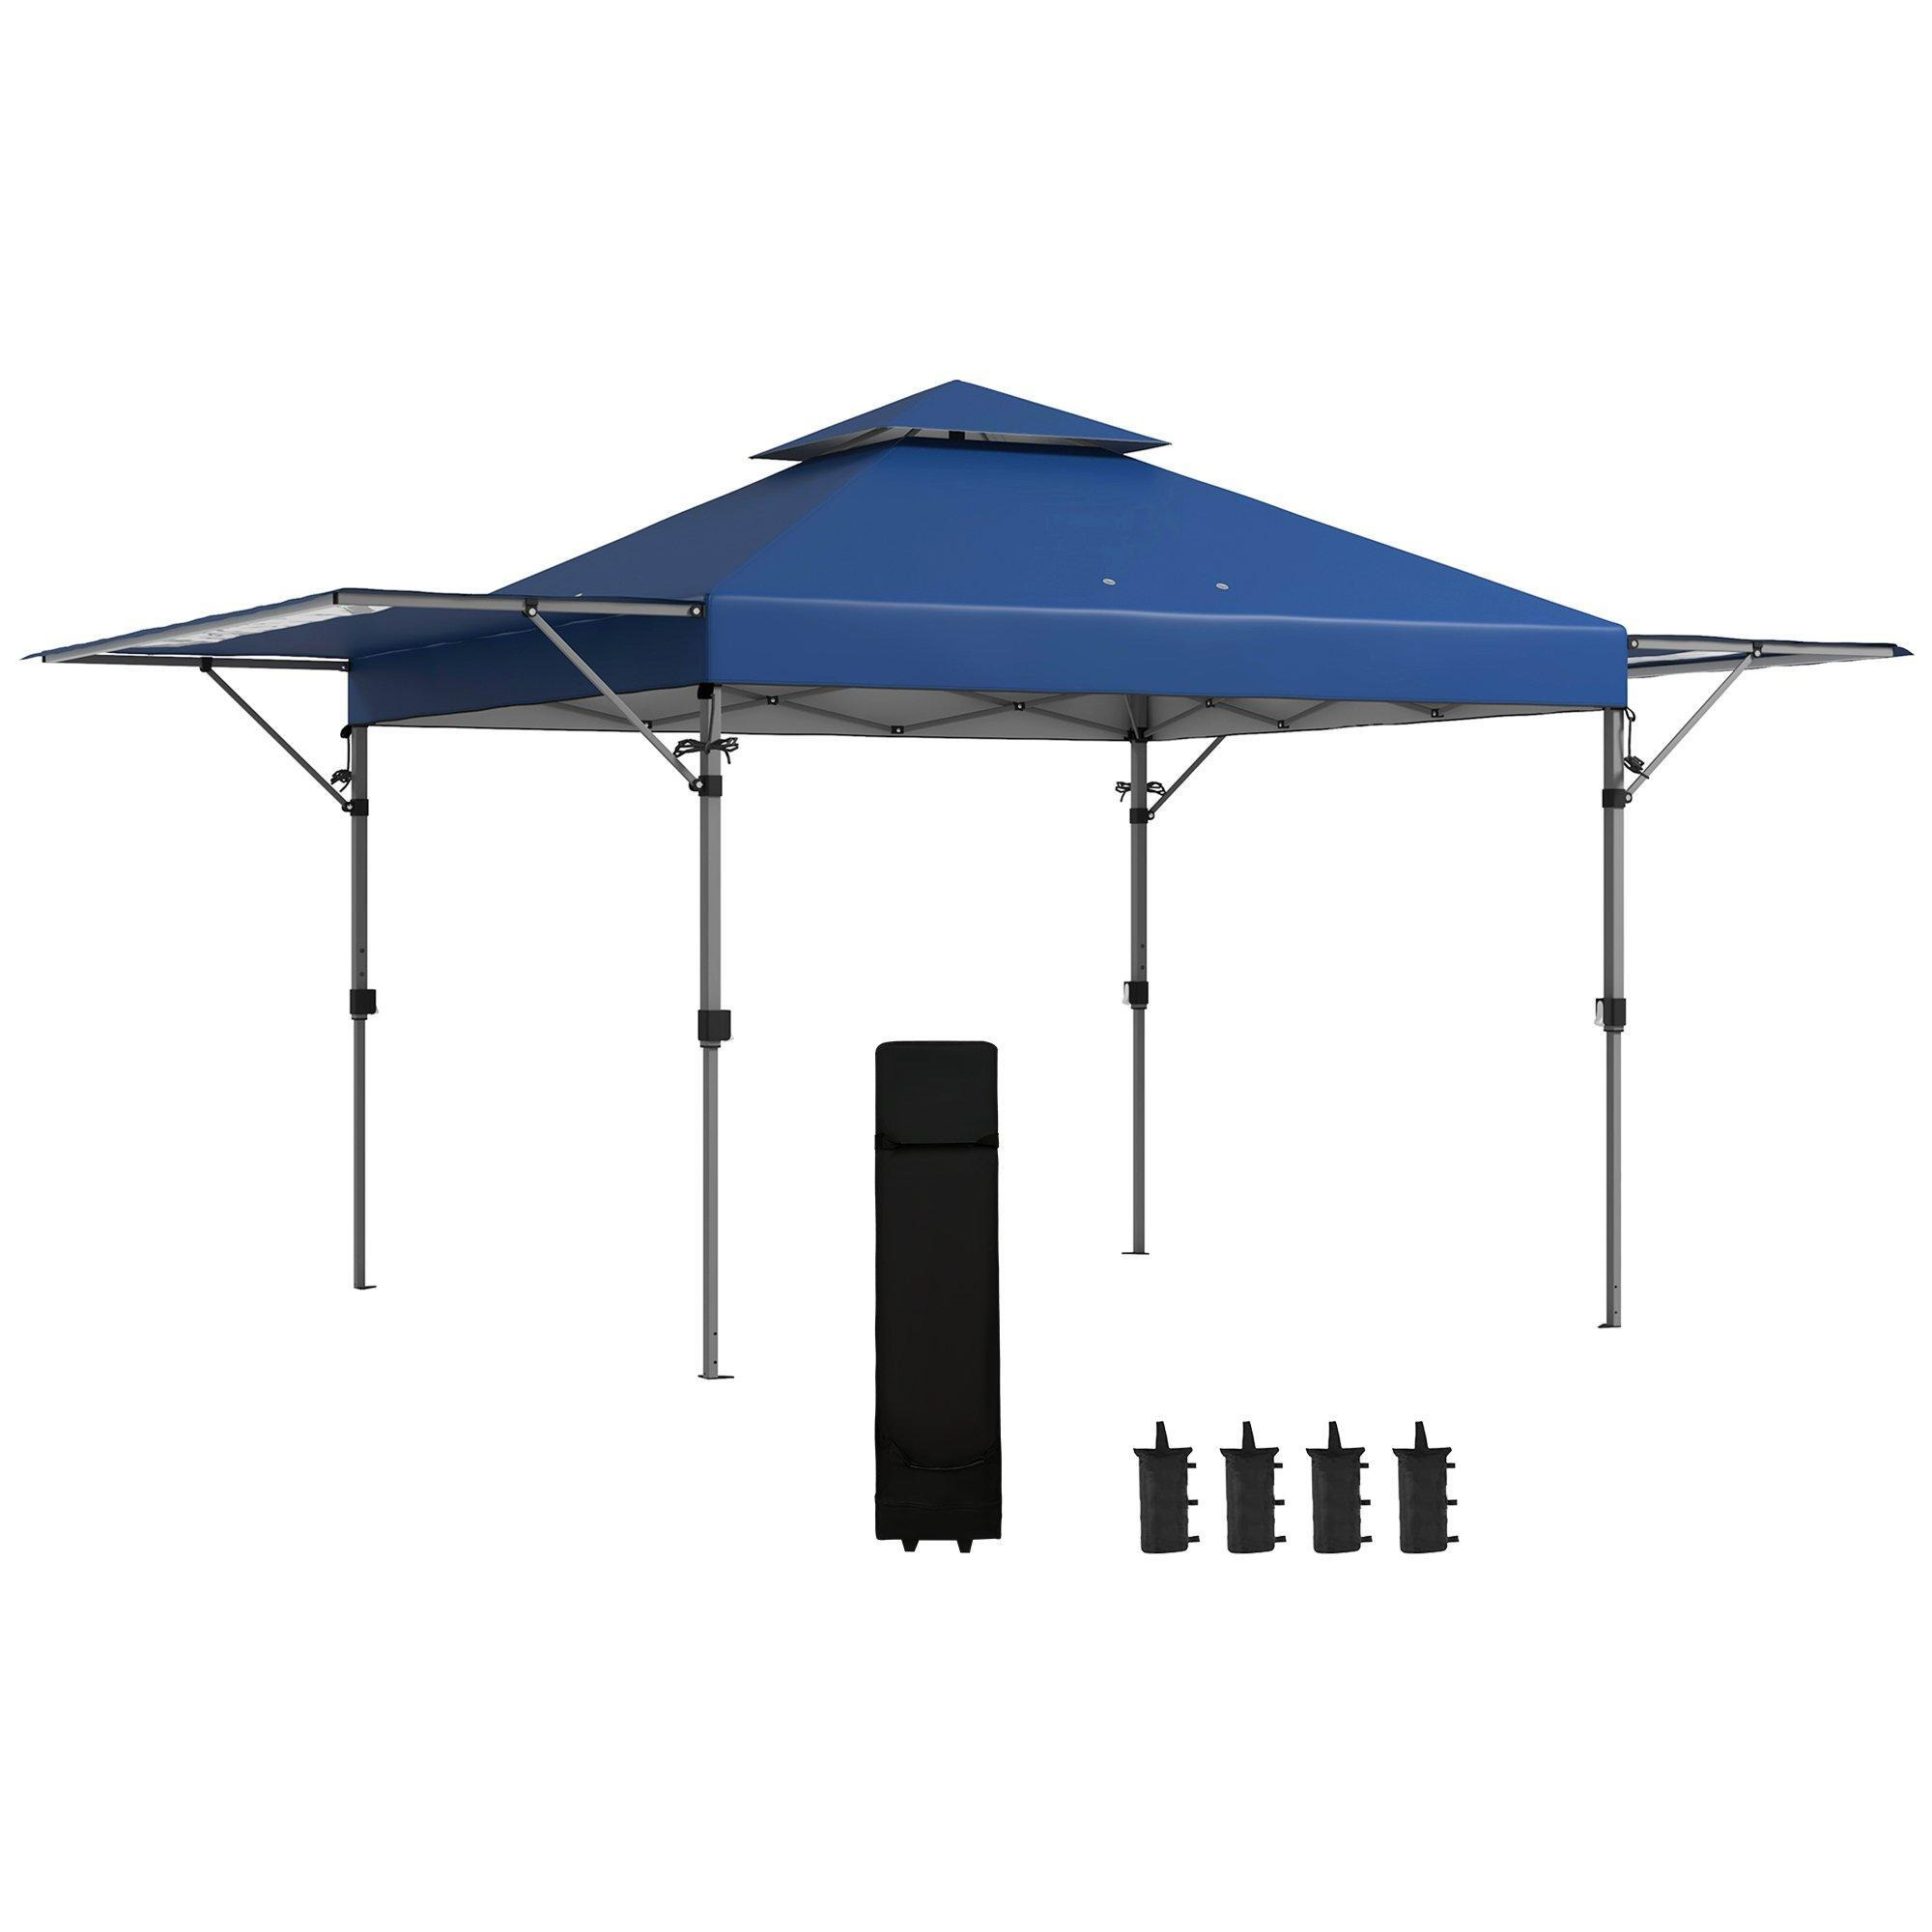 5x3(m) Easy Pop Up Gazebo with 1-Button Push and Extend Dual Awnings - image 1